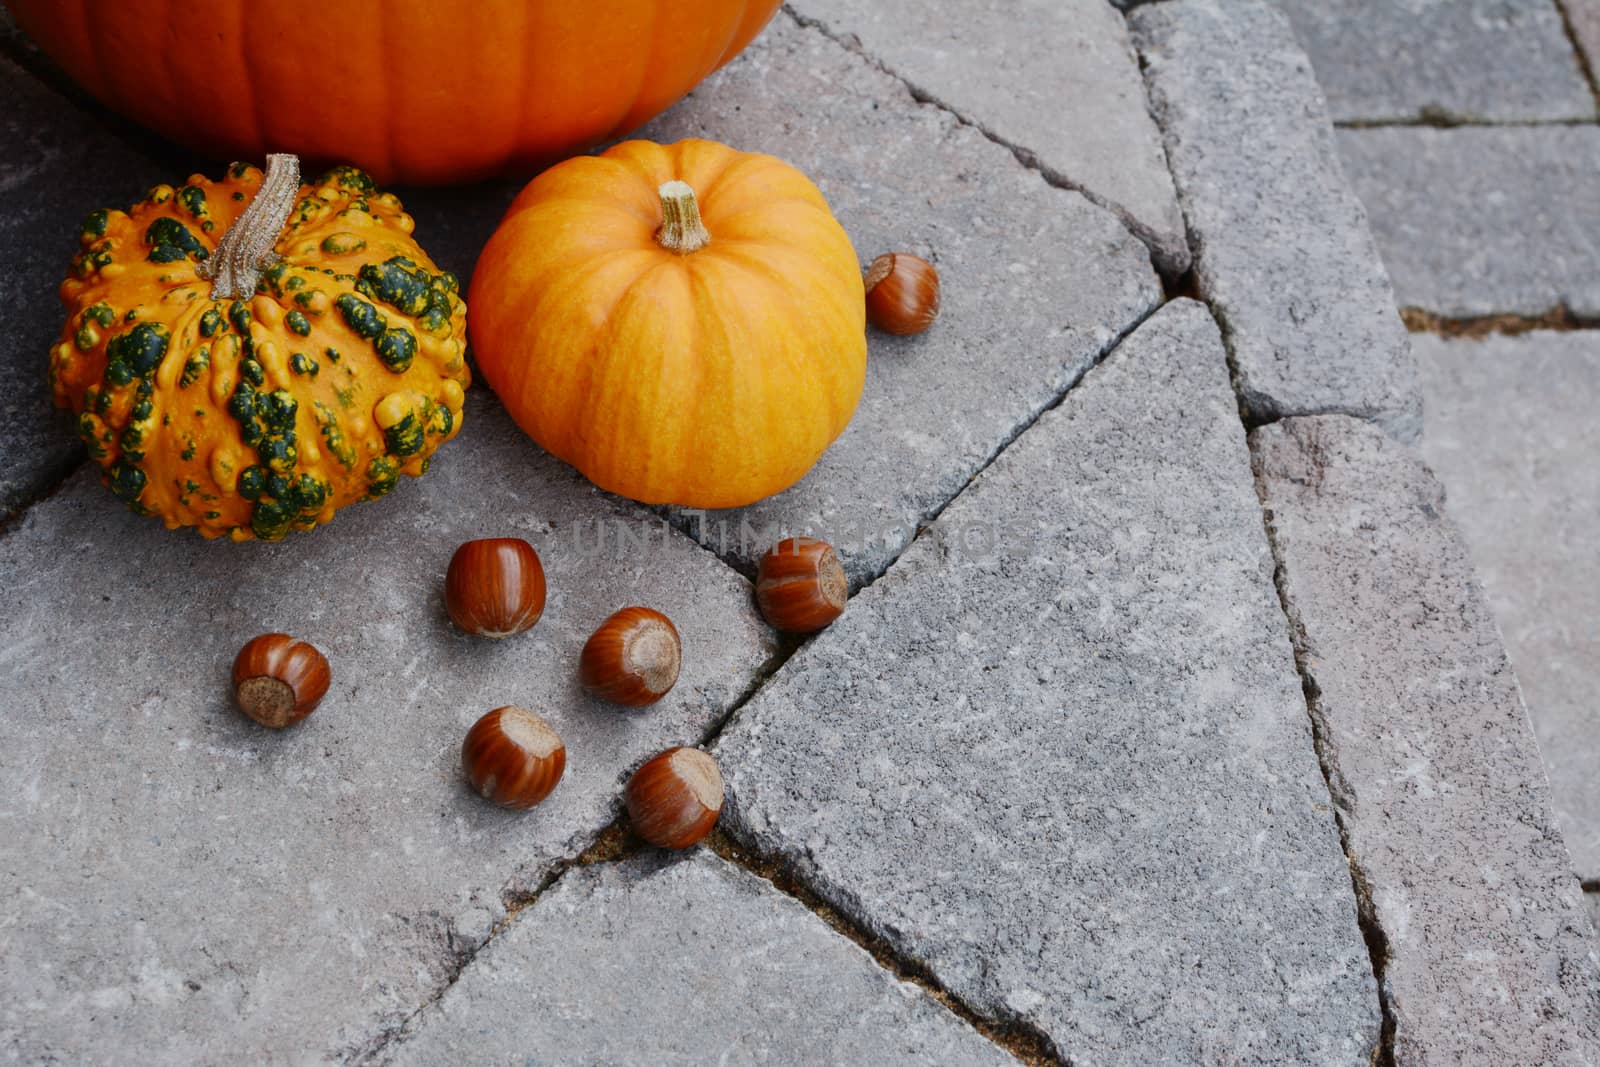 Ornamental gourds and hazelnuts as fall decorations